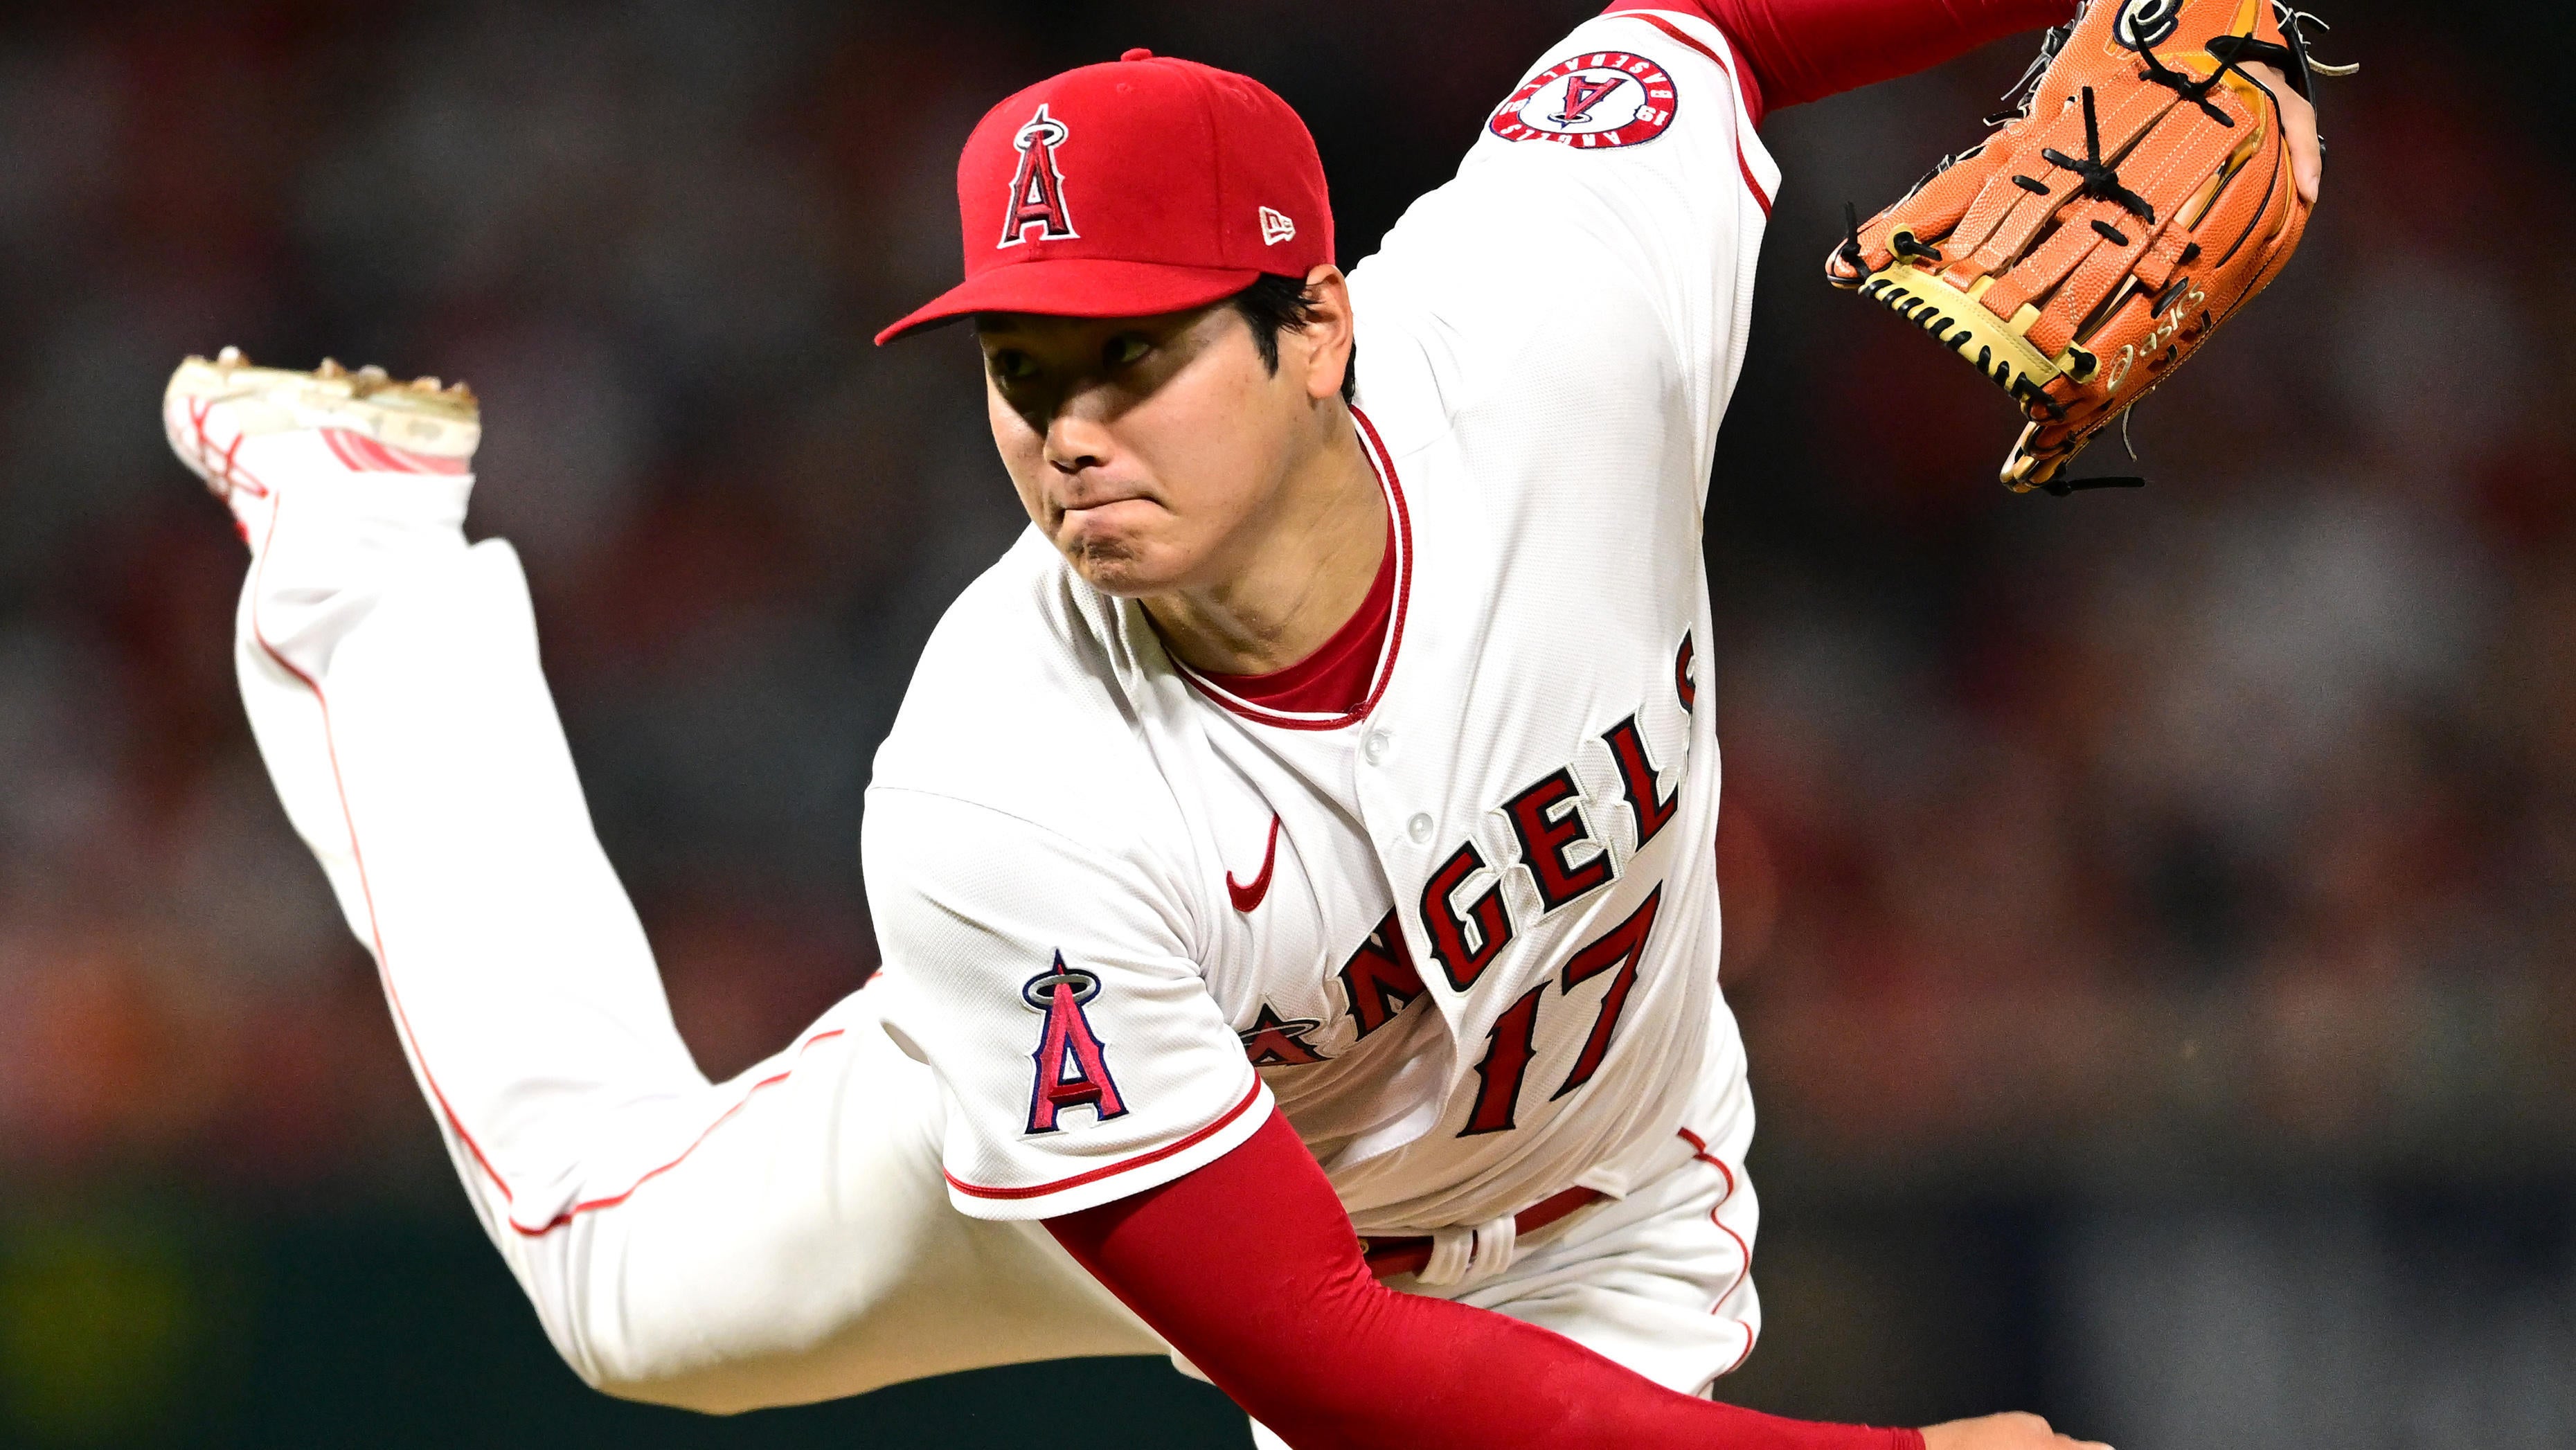 Mike Trout agrees Shohei Ohtani 'won Round 1' between them, thanks Team USA  on Twitter